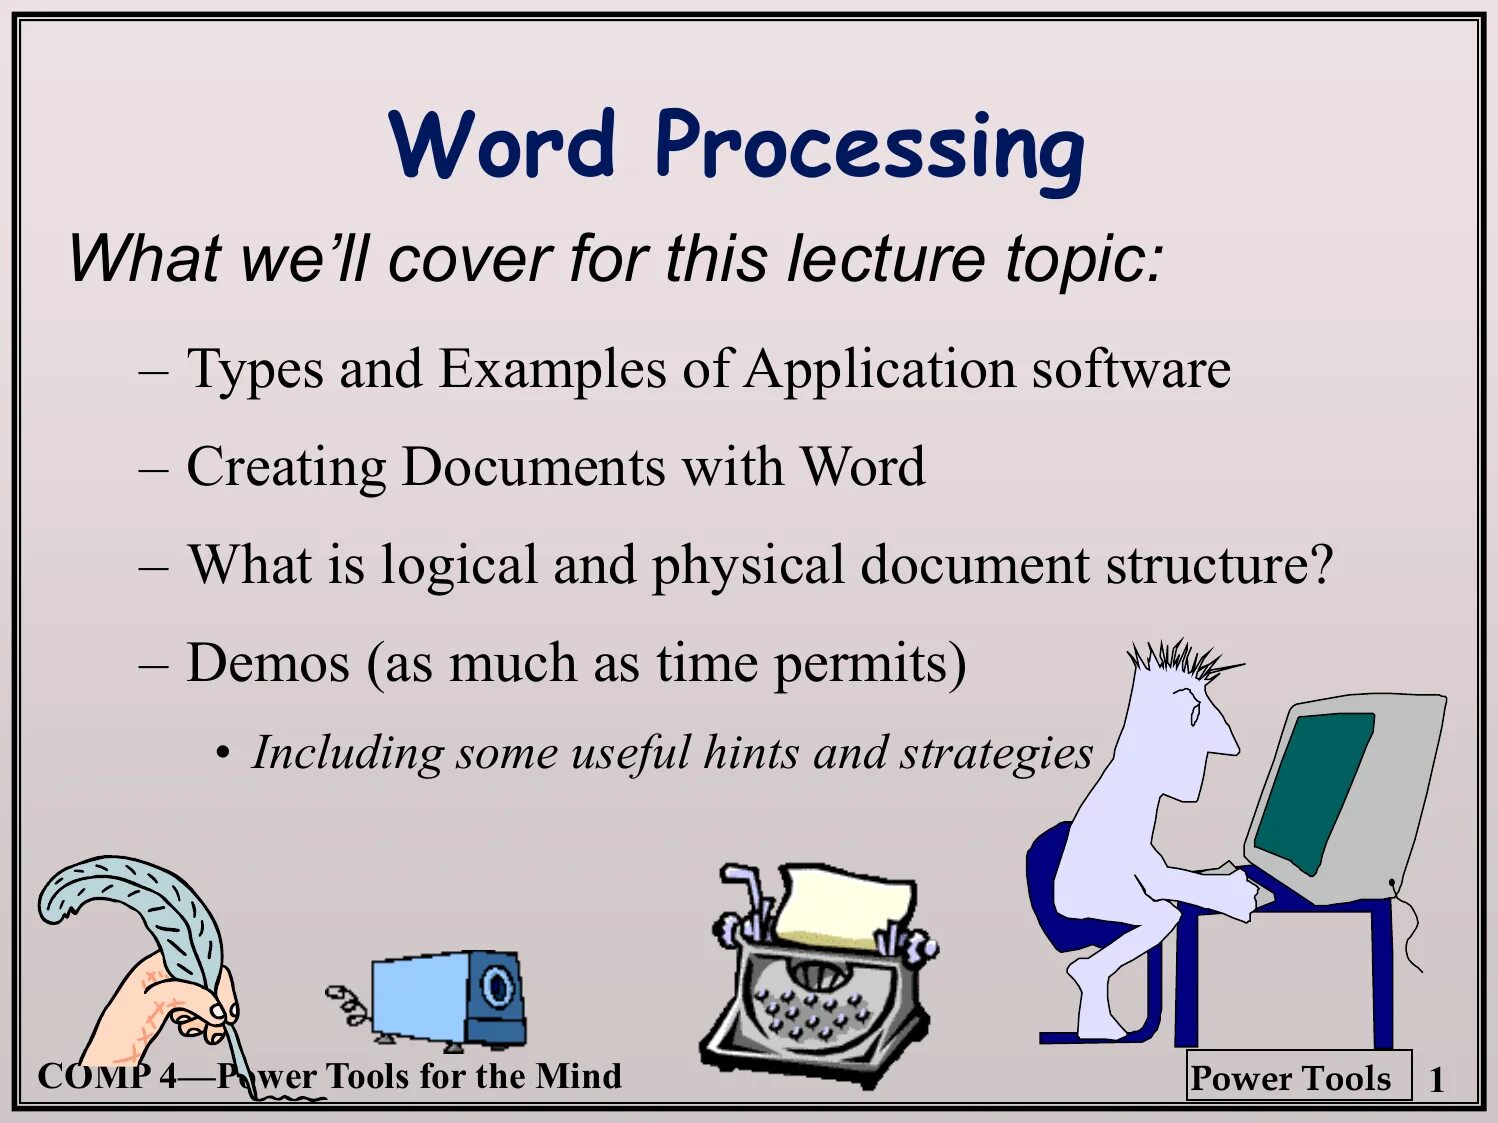 Typing topic. Word processing. Word processing software. Word processing презентация. Word processing applications.